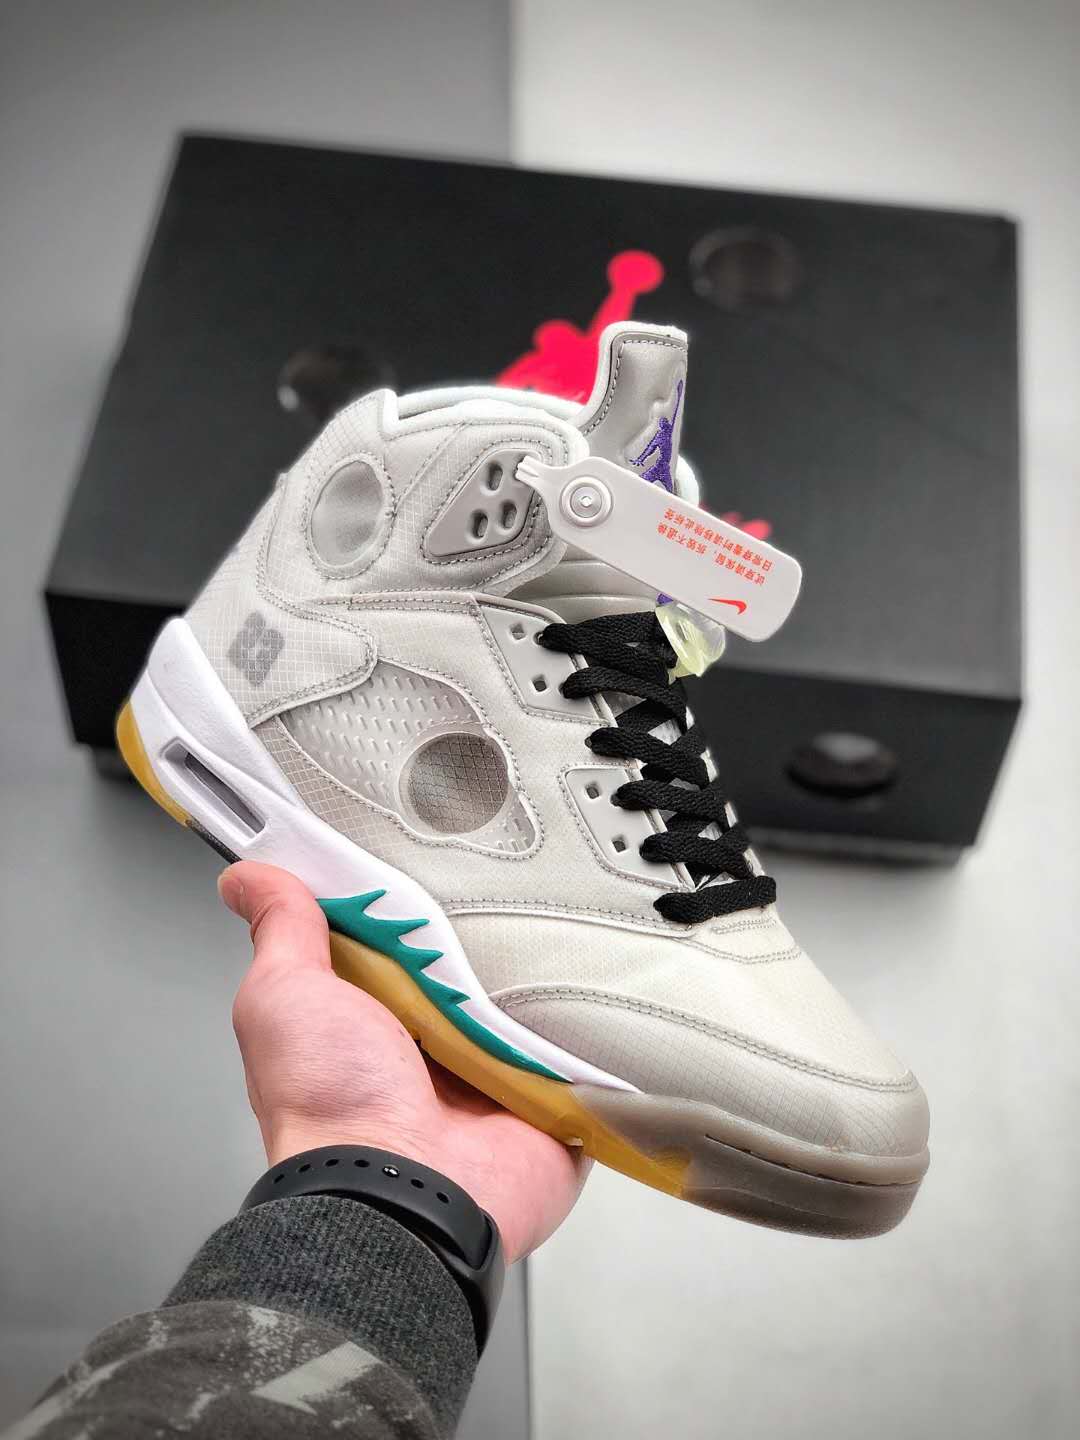 OFF WHITE x Air Jordan 5 Grey Green White | Complete Review & Buying Guide